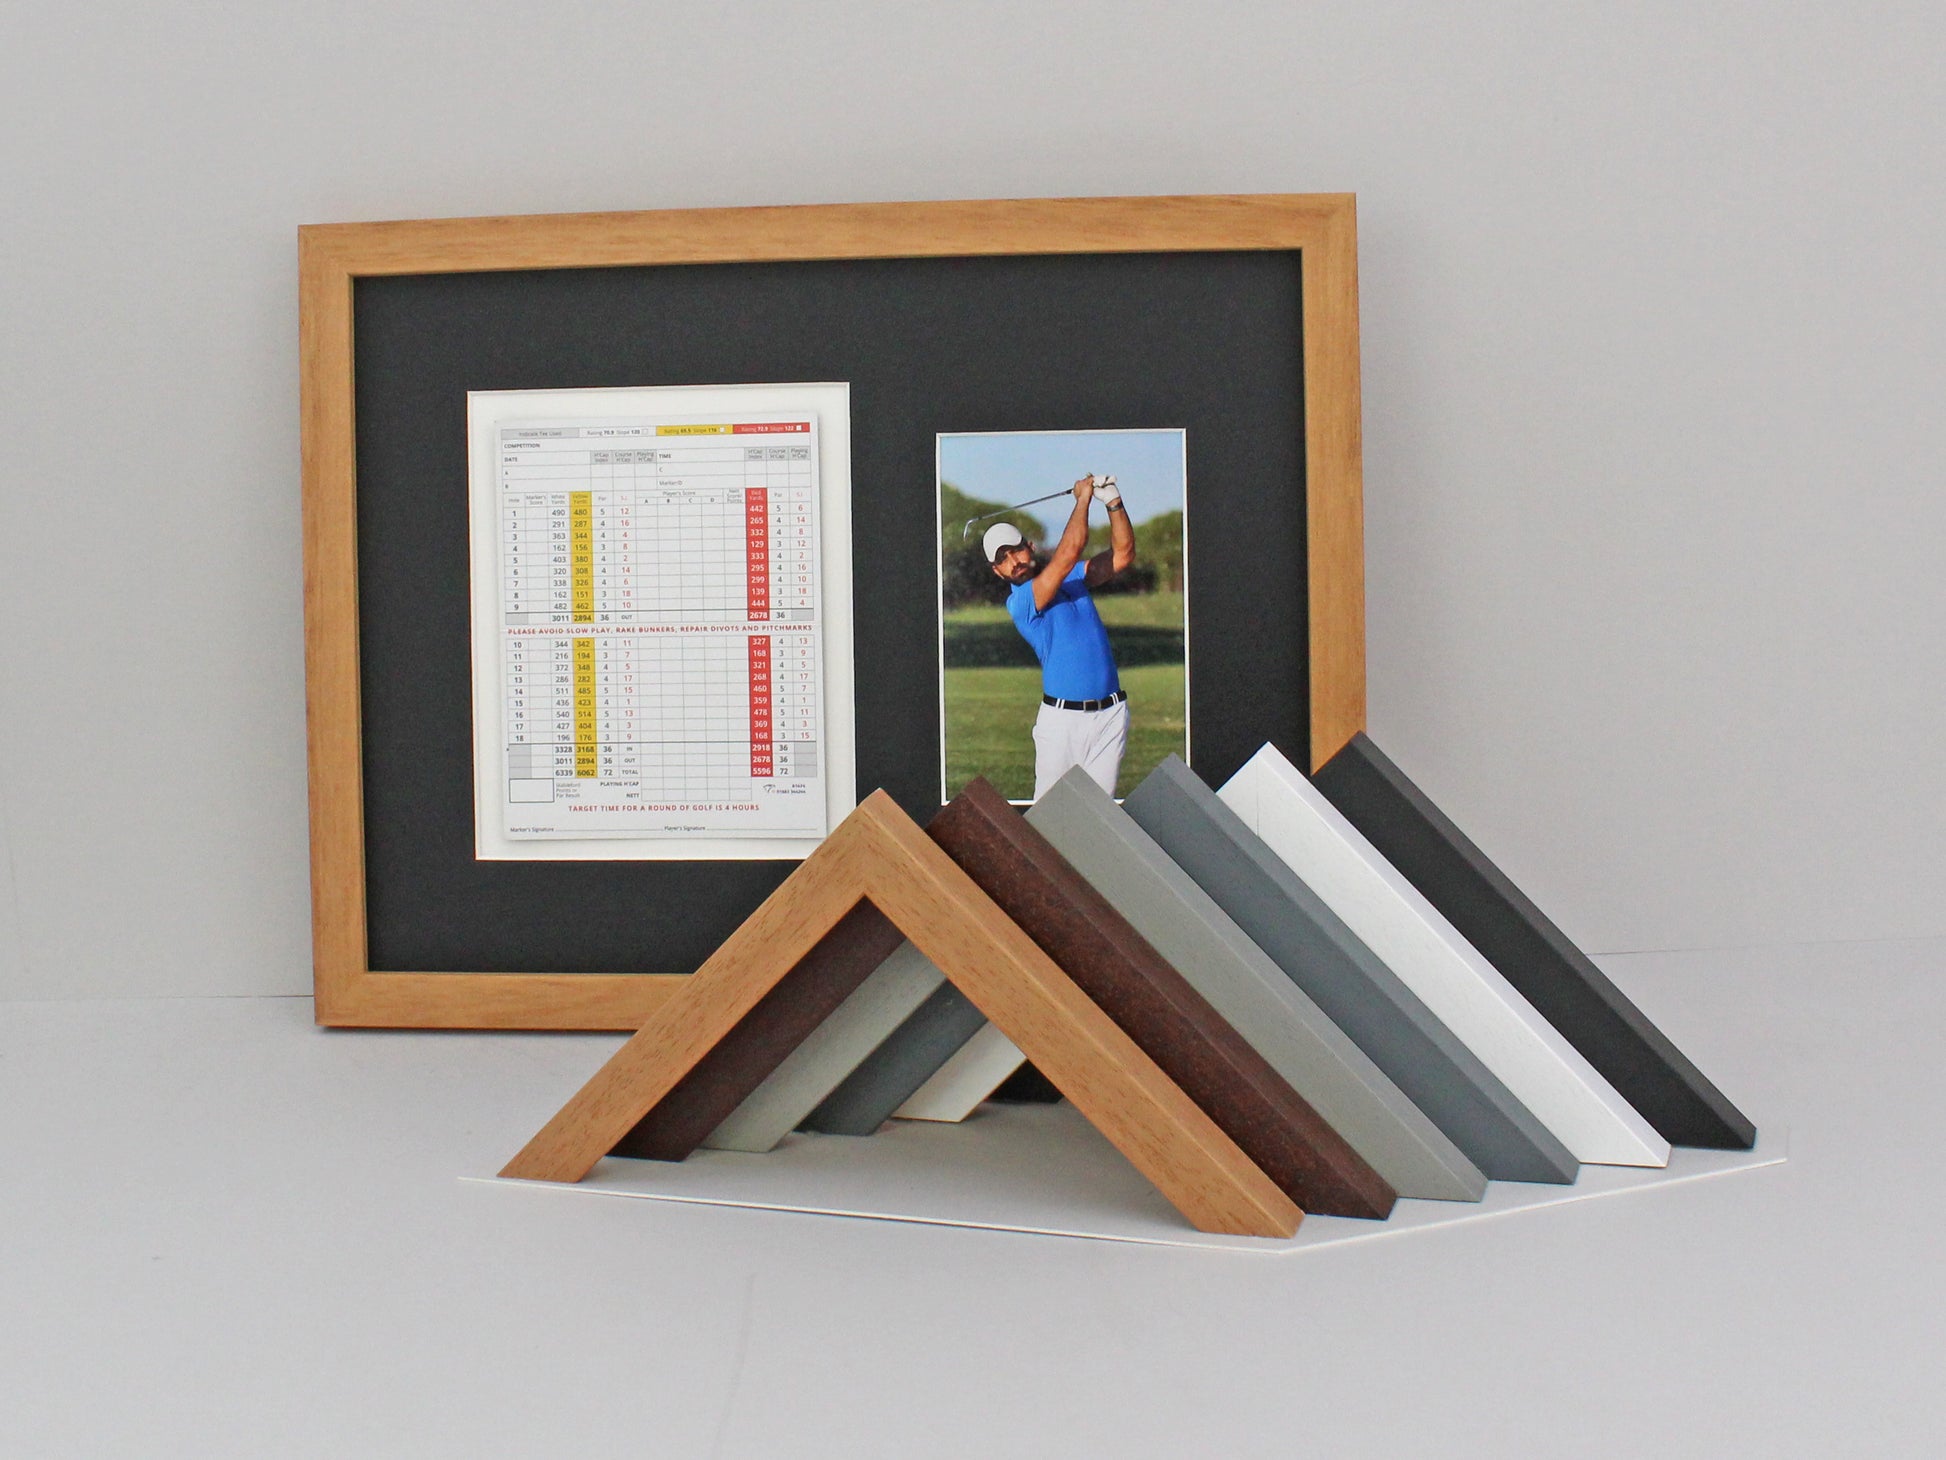 Golf Score Card Display Frame, With 6x4" Photo. 30x40cm Frame | Score Card sizes can vary - Check your size before purchase. - PhotoFramesandMore - Wooden Picture Frames